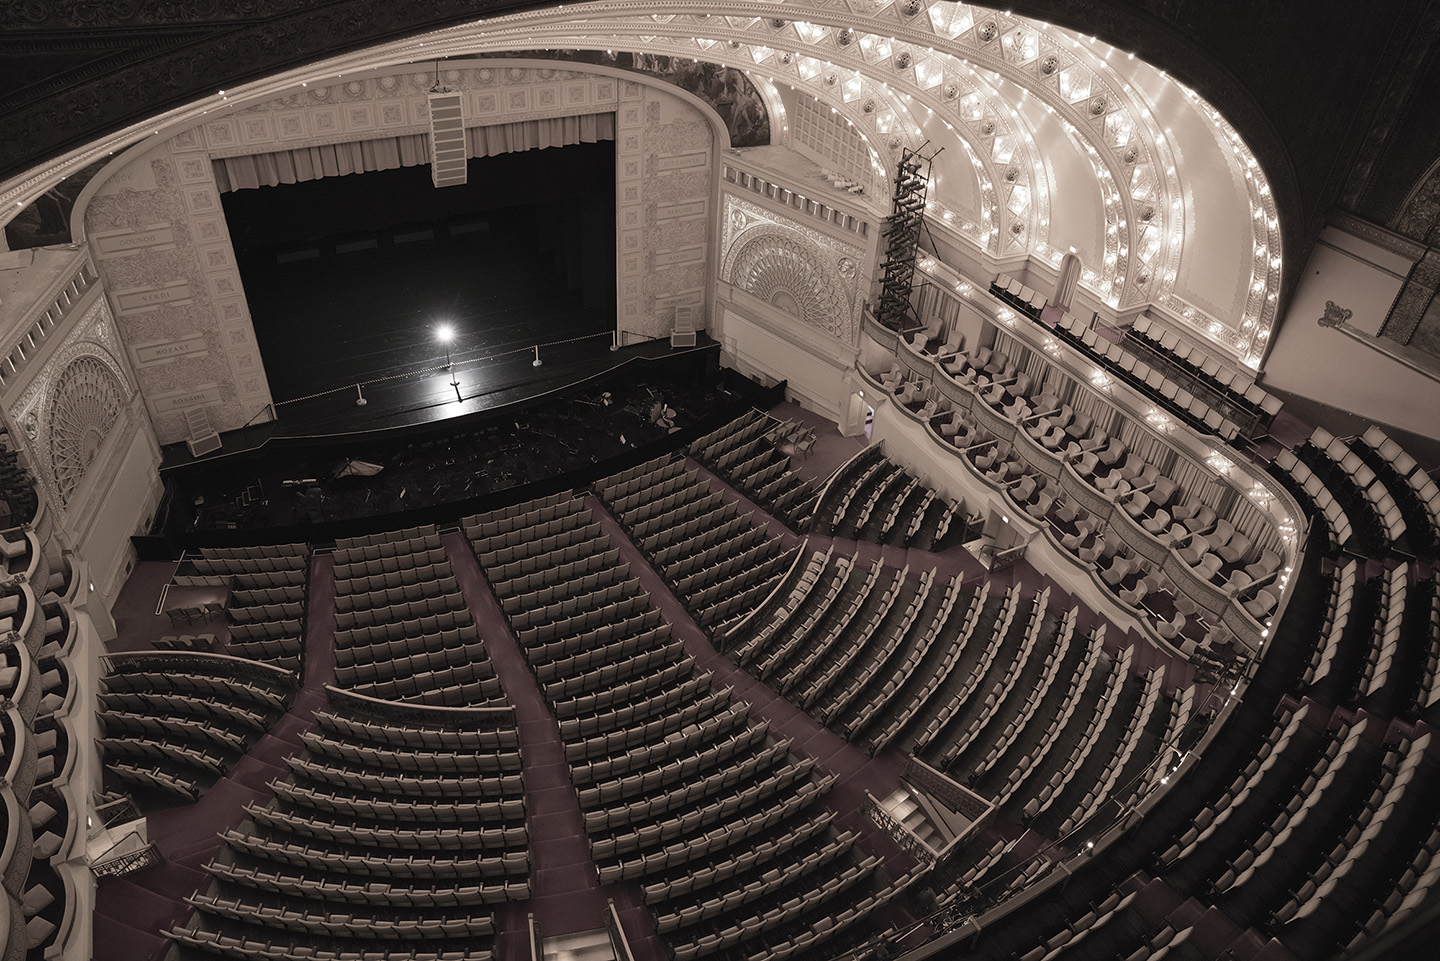 The Auditorium Theatre and its balconies have been the site of numerous ghost encounters.